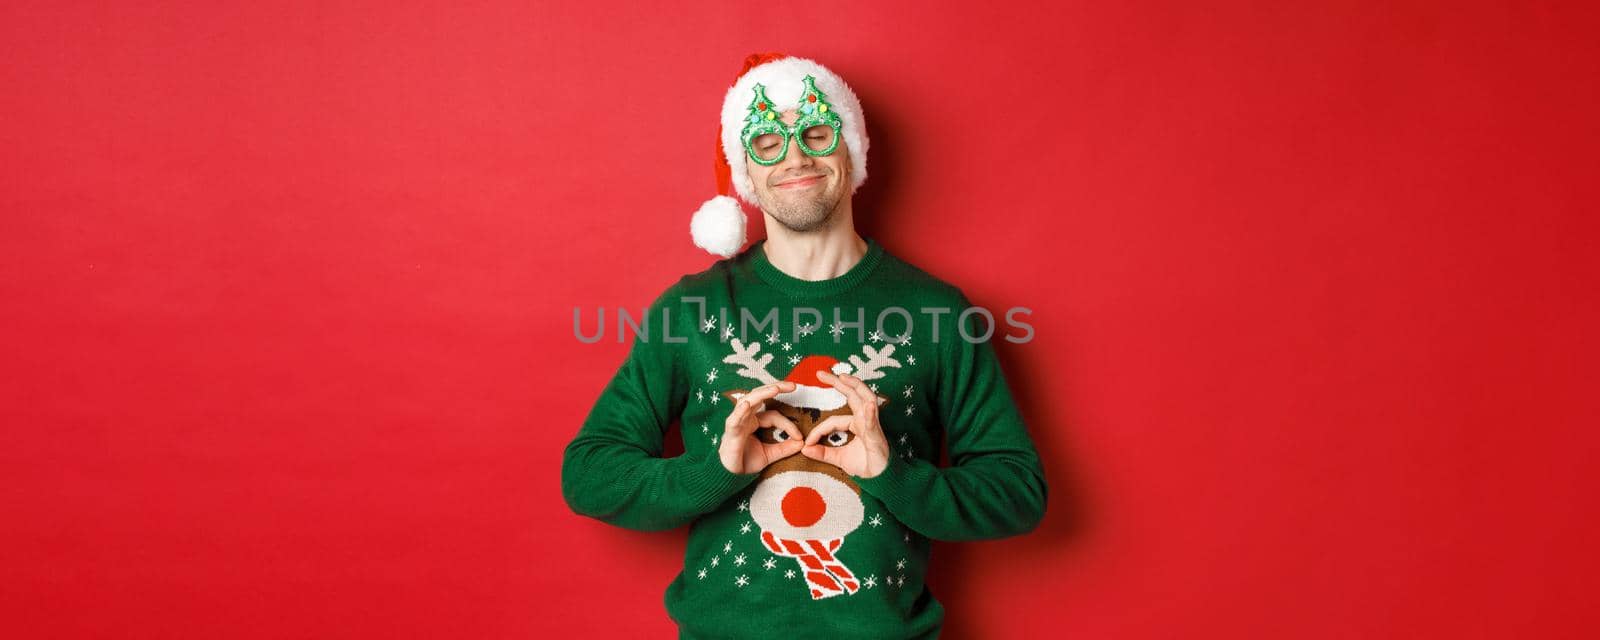 Image of happy smiling man in party glasses and santa hat, fooling around with funny christmas sweater, celebrating winter holidays, standing over red background.